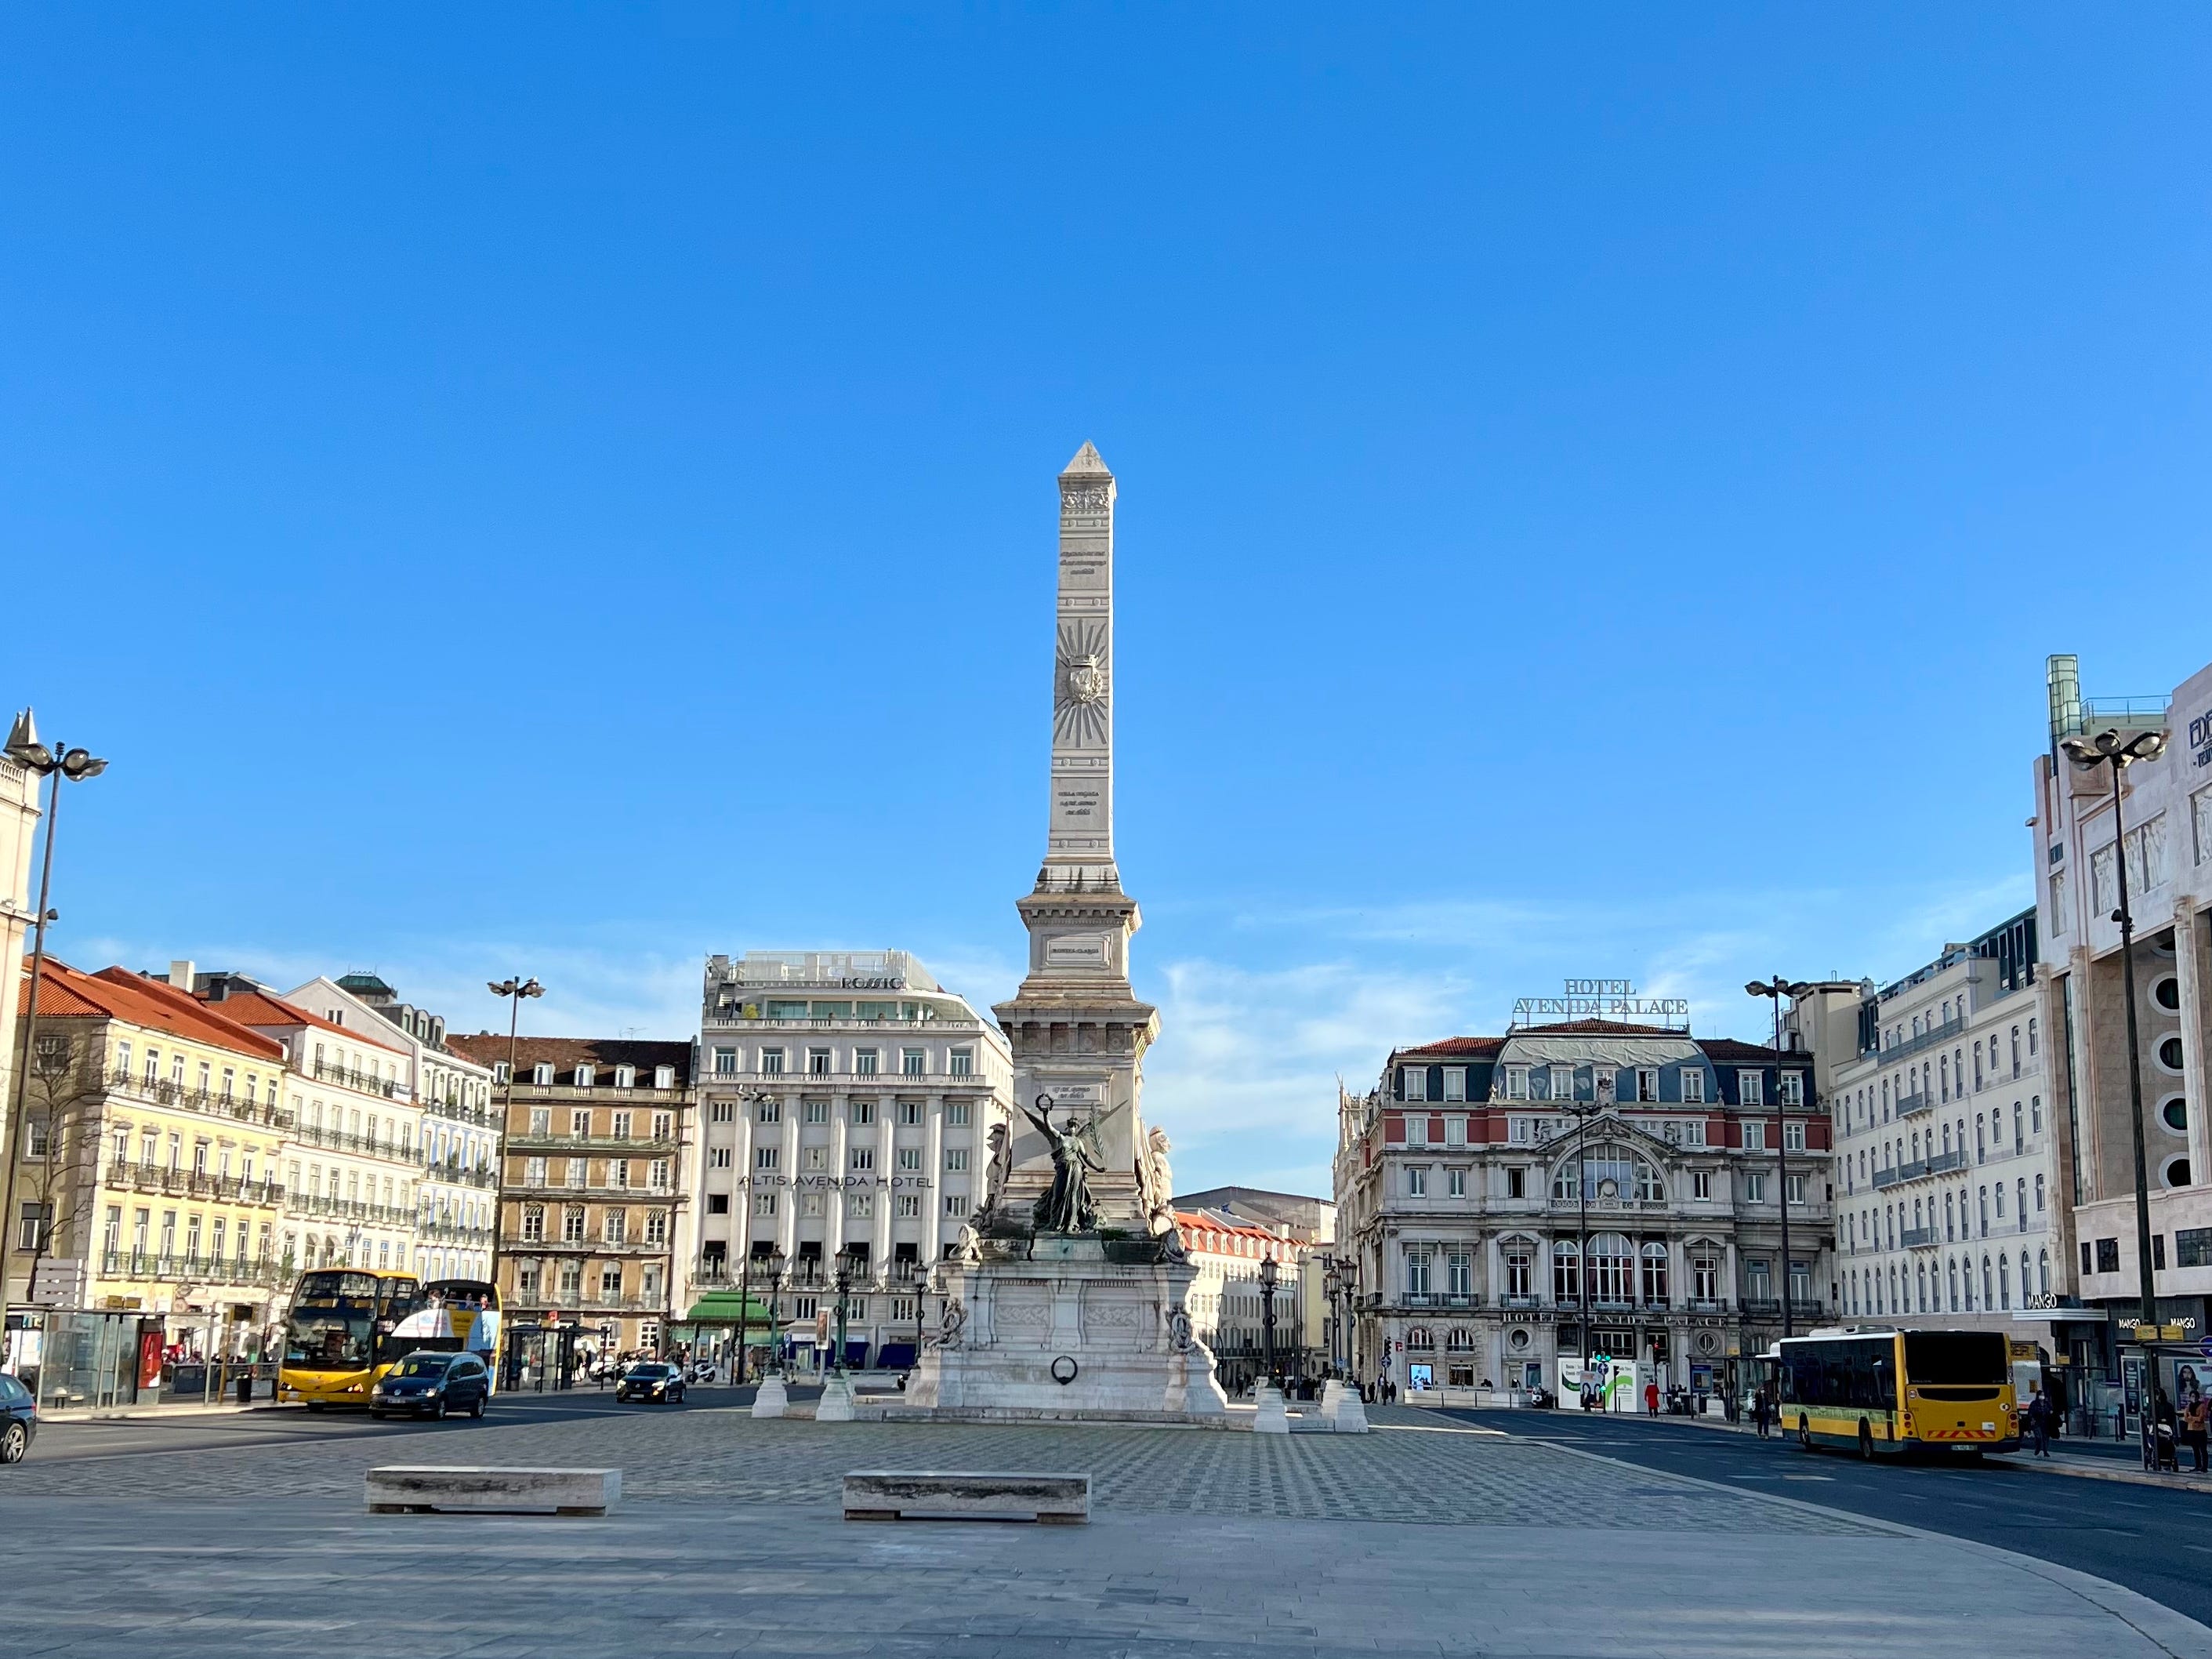 <p>My trip to Lisbon was <a href="https://www.businessinsider.com/affordable-european-cities-2018-7">more affordable than my vacations in other European cities</a> — including London, Paris, Rome, and Milan. </p><p>To be fair, prices may have dipped since I visited during the offseason, but I budgeted a lot more for the trip than I ended up spending. </p><p>When my mom and I went out to dinner, I spent between $25 and $35 on both meals, which included appetizers, main courses, and desserts. Our most expensive meal in Lisbon was around $45, and we ordered a lot of food. </p><p>Prices vary depending on the restaurant. I didn't go to any <a href="https://www.businessinsider.com/michelin-star-restaurant-disney-world-victoria-and-alberts-review-2024-6">Michelin-starred eateries</a> during my trip, but I did go to upscale restaurants. </p><p>Additionally, the priciest Uber I took in Lisbon was $15, and it went all the way to the other side of the city. </p><p>In some other European cities, I spent a lot more money on transportation and dining (many restaurants charged over $50 for an appetizer, two main courses, and a dessert), so the prices in Lisbon were a pleasant surprise.</p>